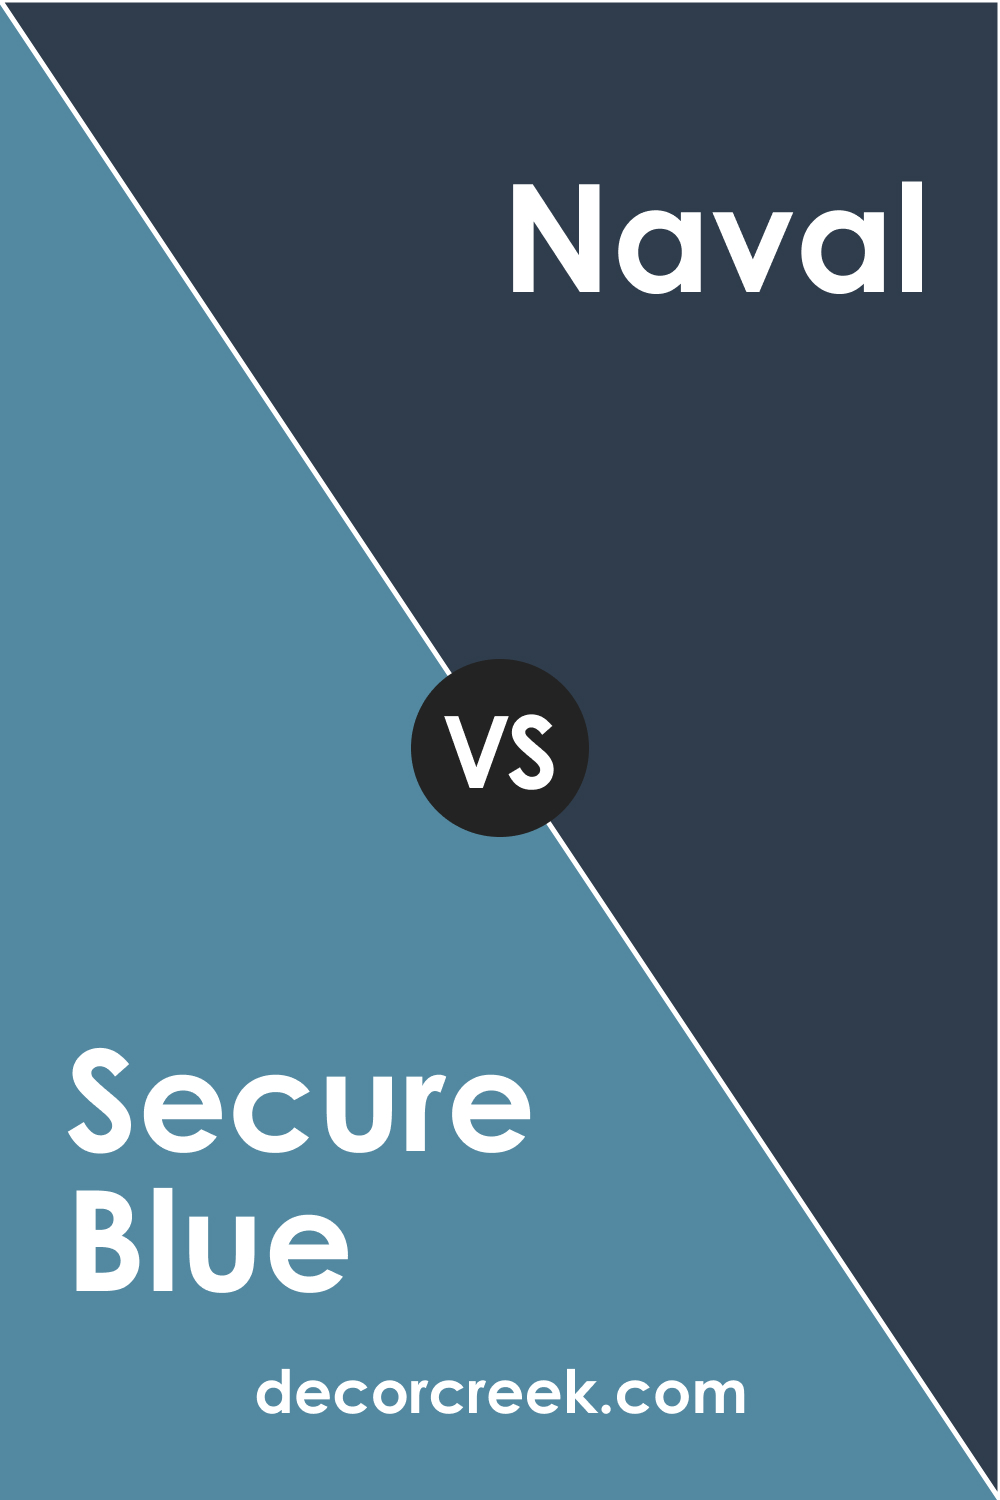 Secure Blue SW 6508 and SW 6244 Naval